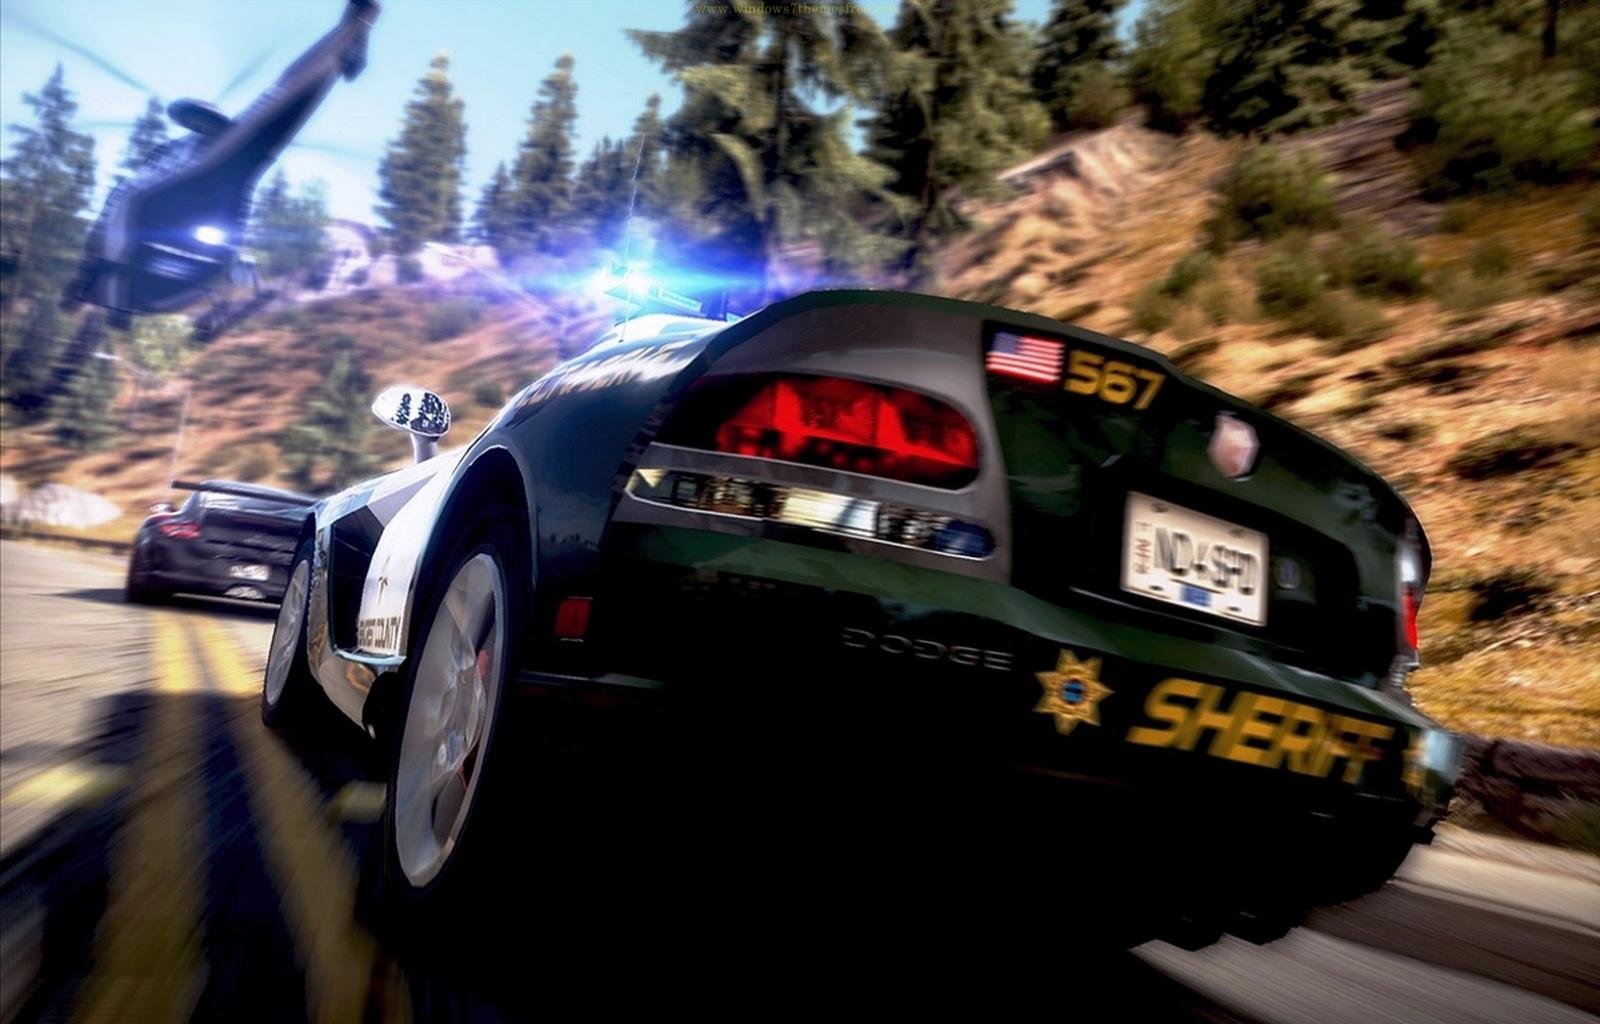 Awesome Need For Speed: Hot Pursuit free wallpaper ID:256262 for hd 1600x1024 computer